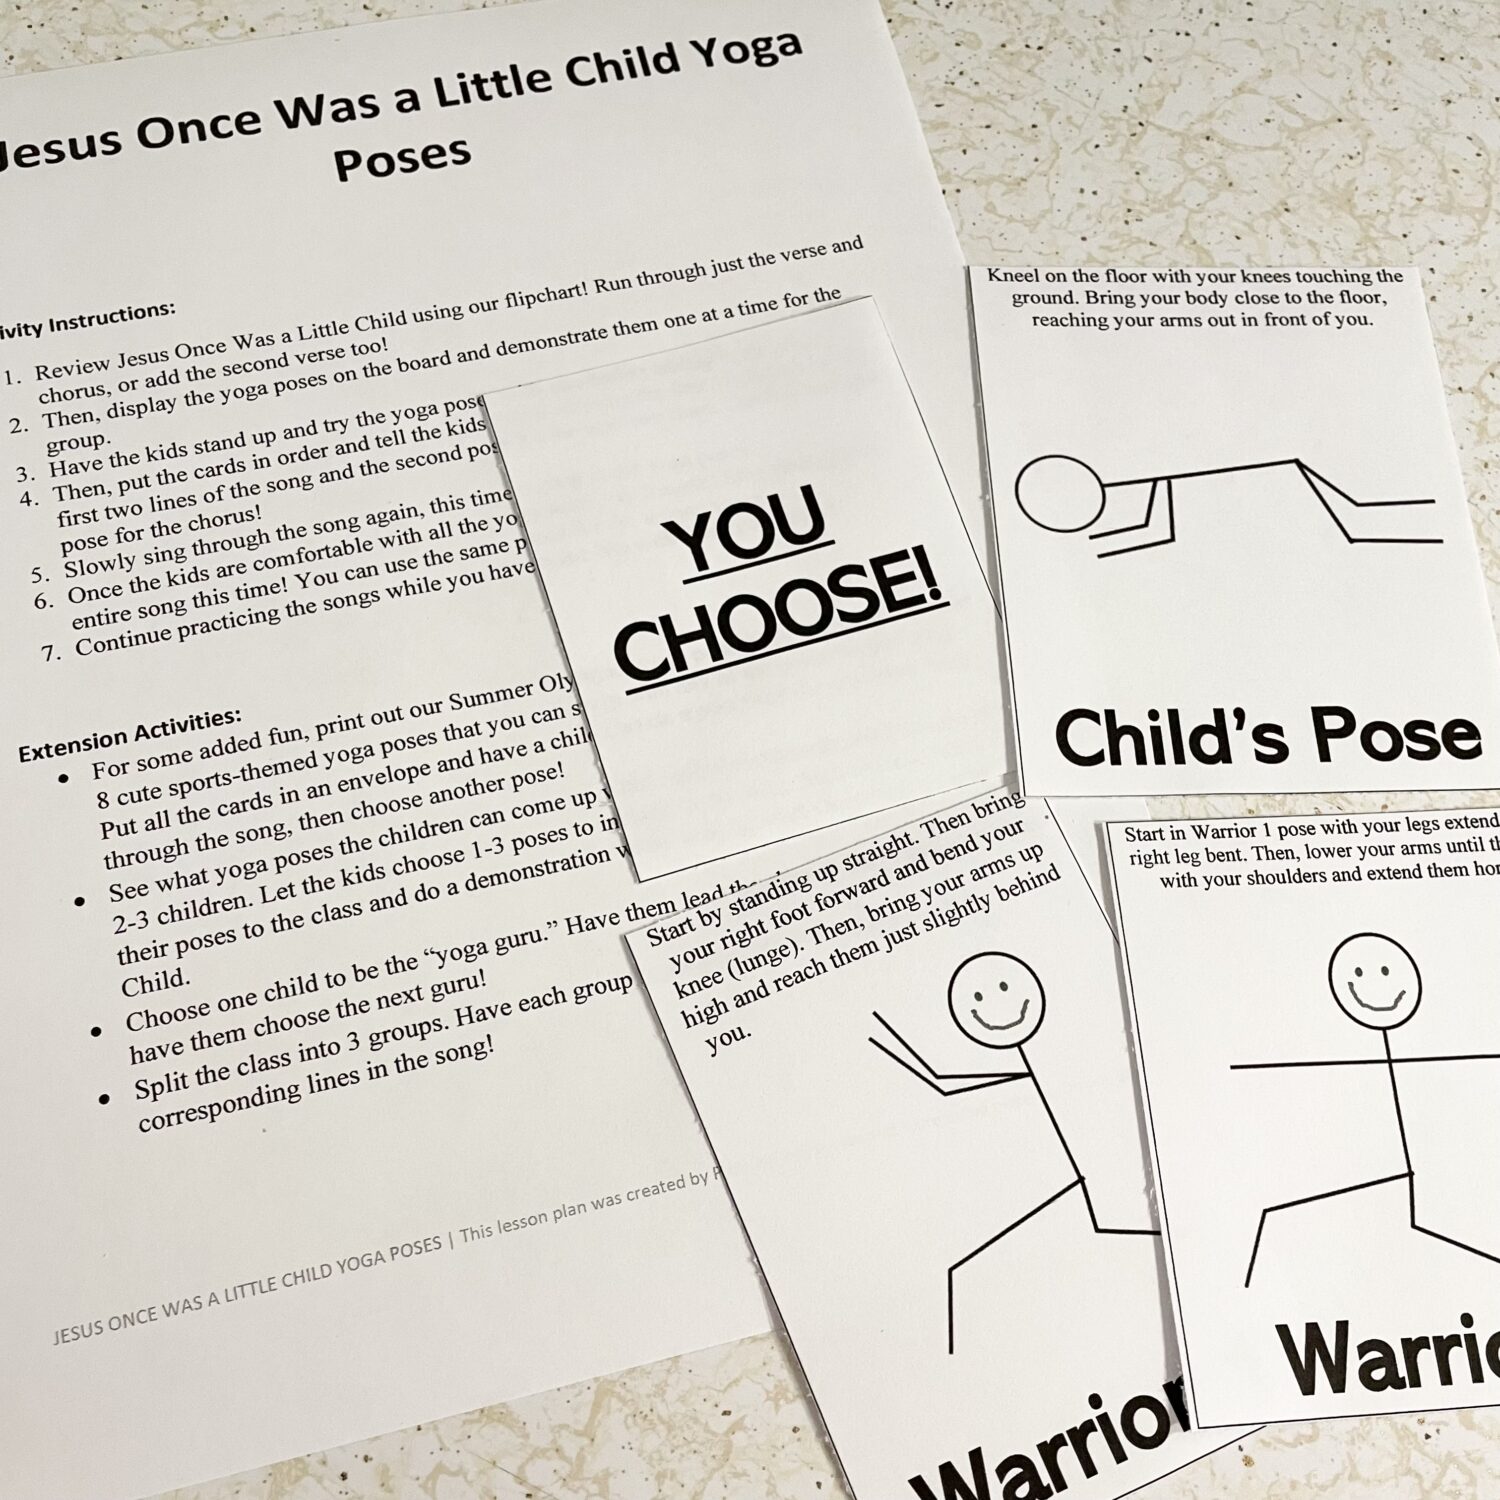 Fun Jesus Once Was a Little Child Yoga Poses movement activty learn 3 new yoga poses to use as you review this fun song for LDS Primary Music Leaders teaching Come Follow Me New Testament.